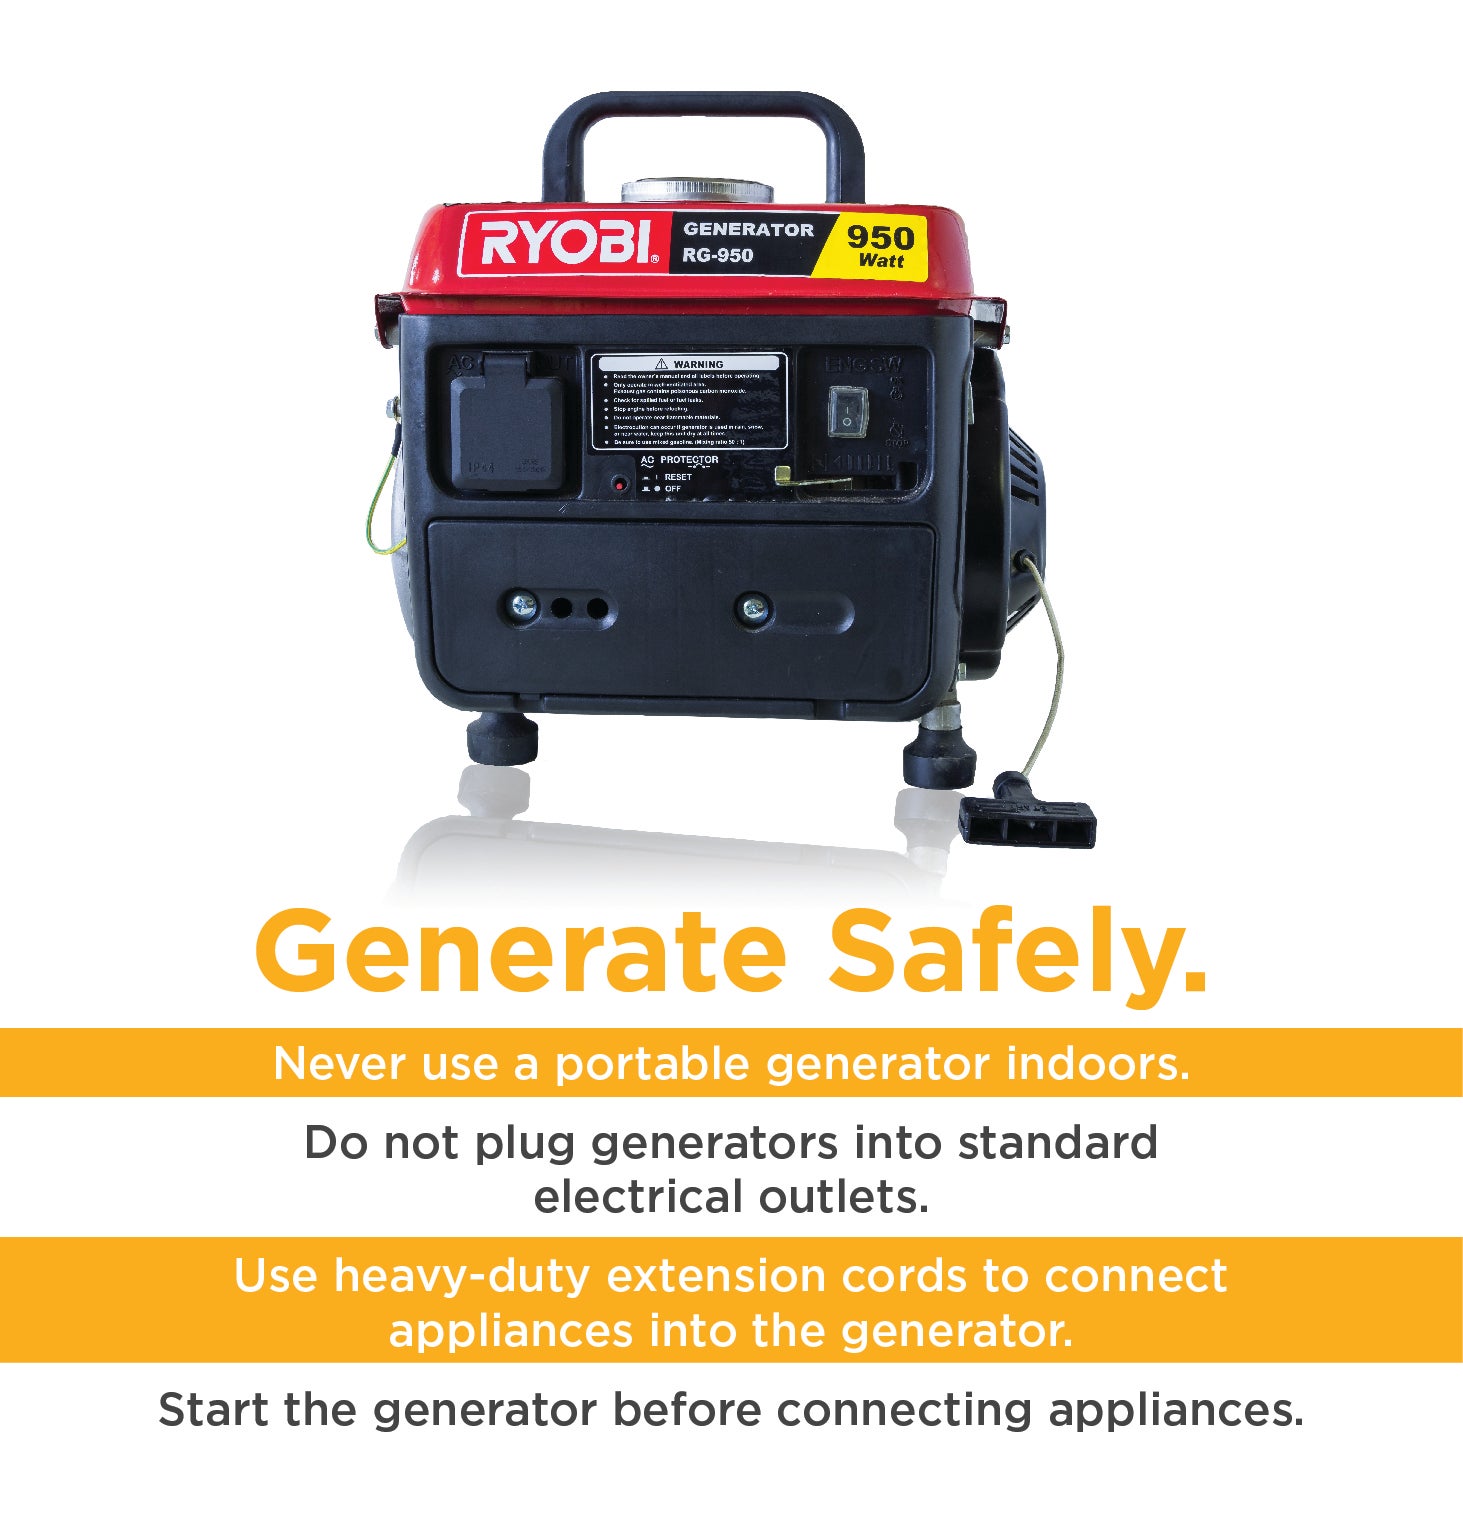 generate safetly. Never use a portable generator indoors. Do not plug generators into standard electrical outlets. Use heavy-duty extension cords to connect appliances into the generator. Start the generator before connecting appliances.